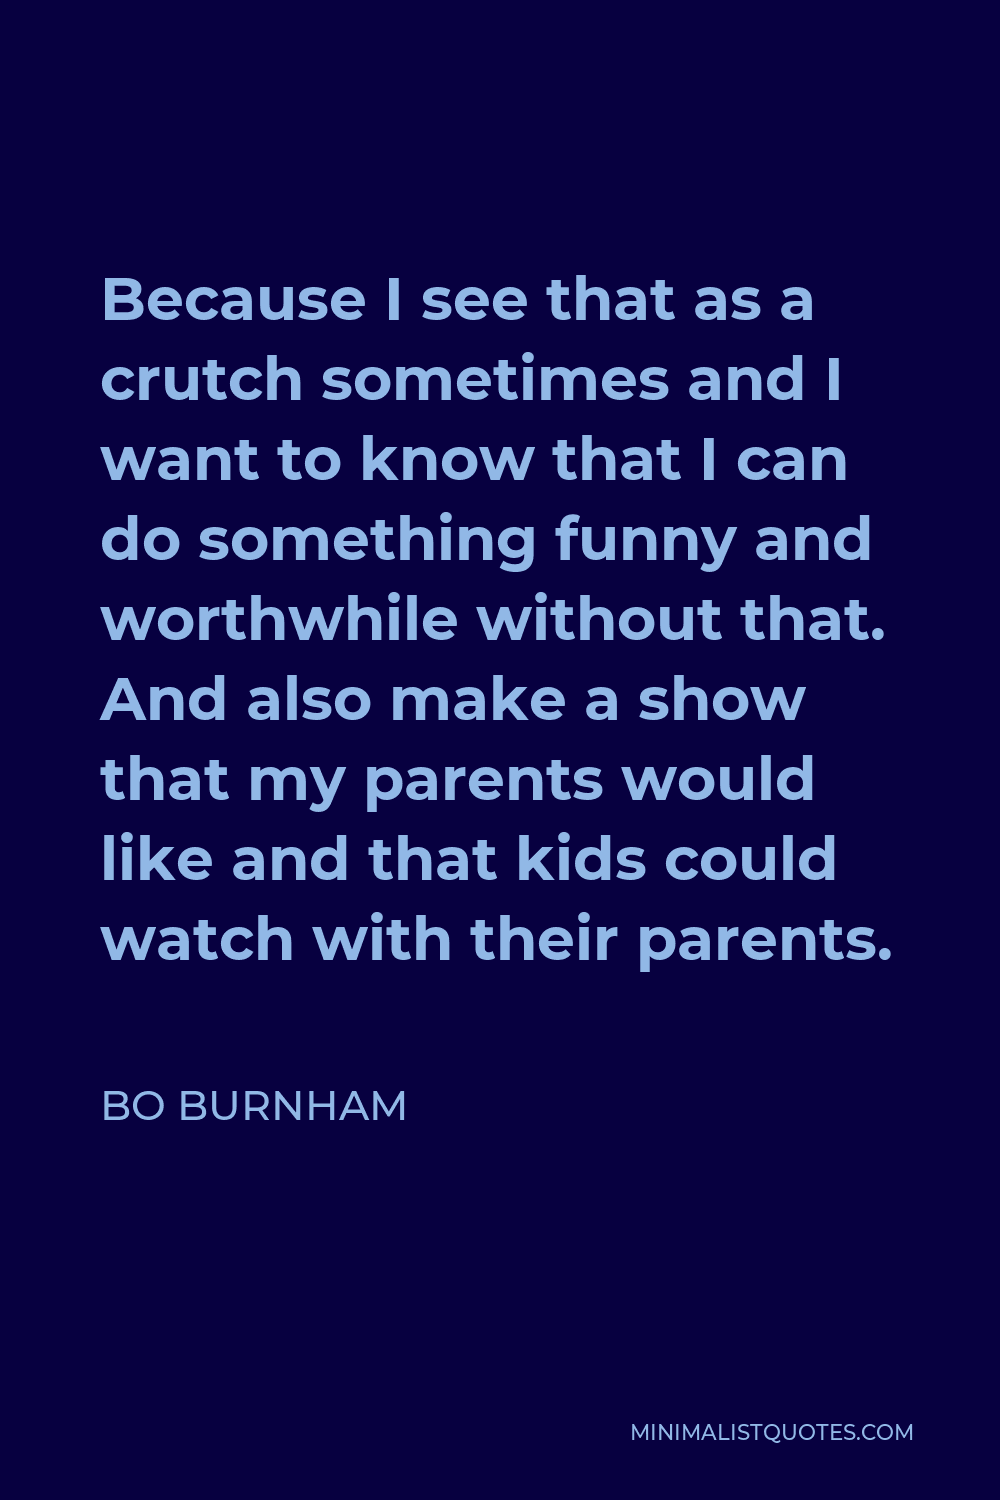 Bo Burnham Quote - Because I see that as a crutch sometimes and I want to know that I can do something funny and worthwhile without that. And also make a show that my parents would like and that kids could watch with their parents.